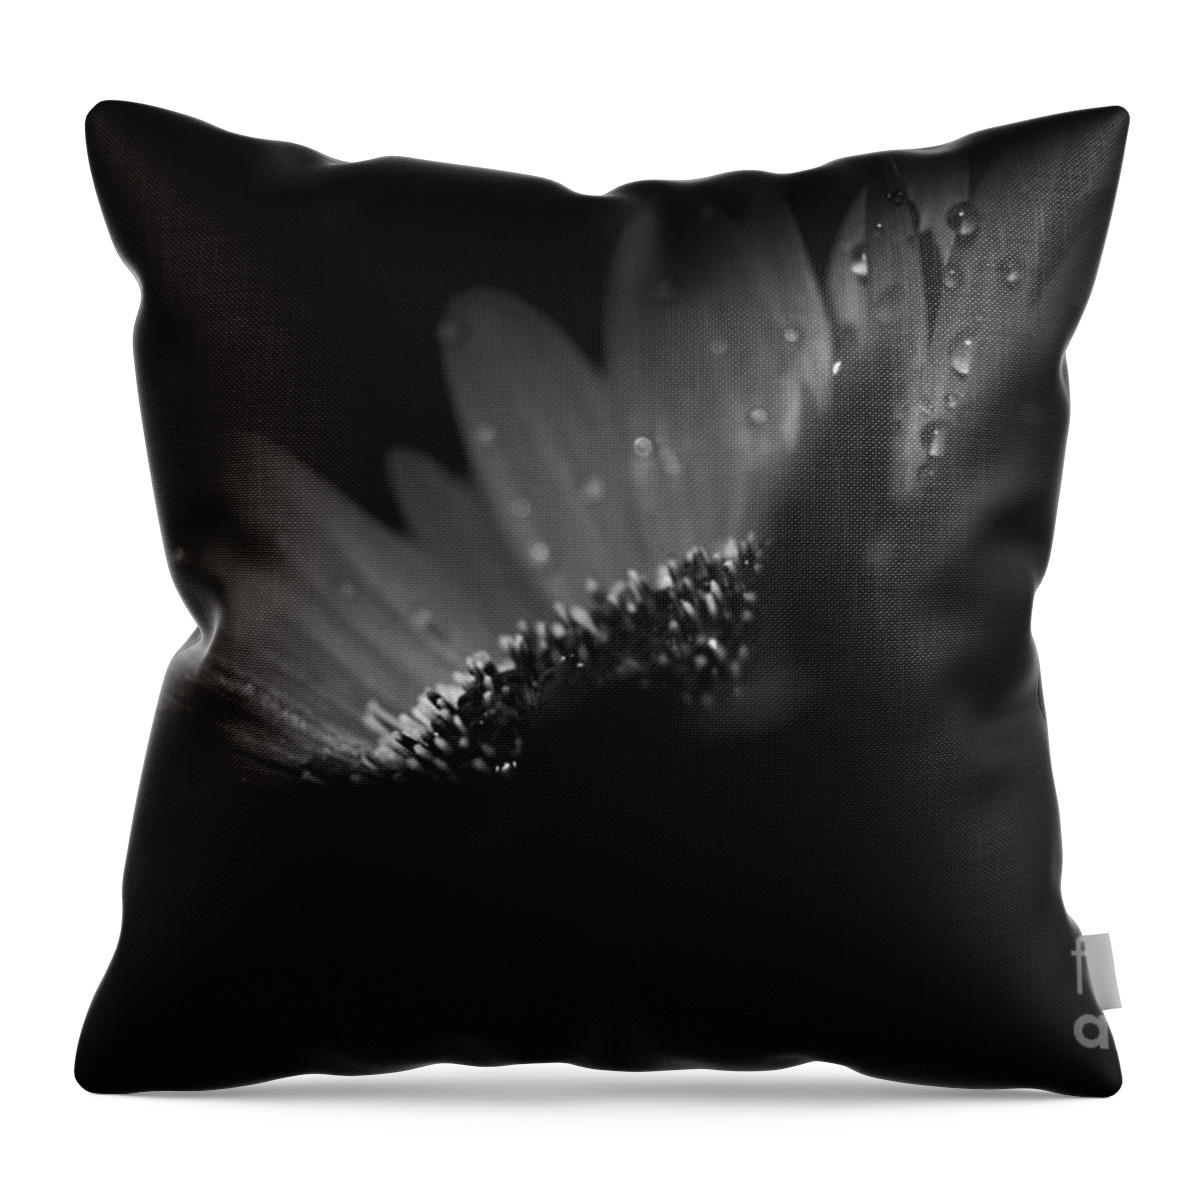 A Vision Of Beauty Throw Pillow featuring the photograph A Vision of Beauty by Sharon Mau